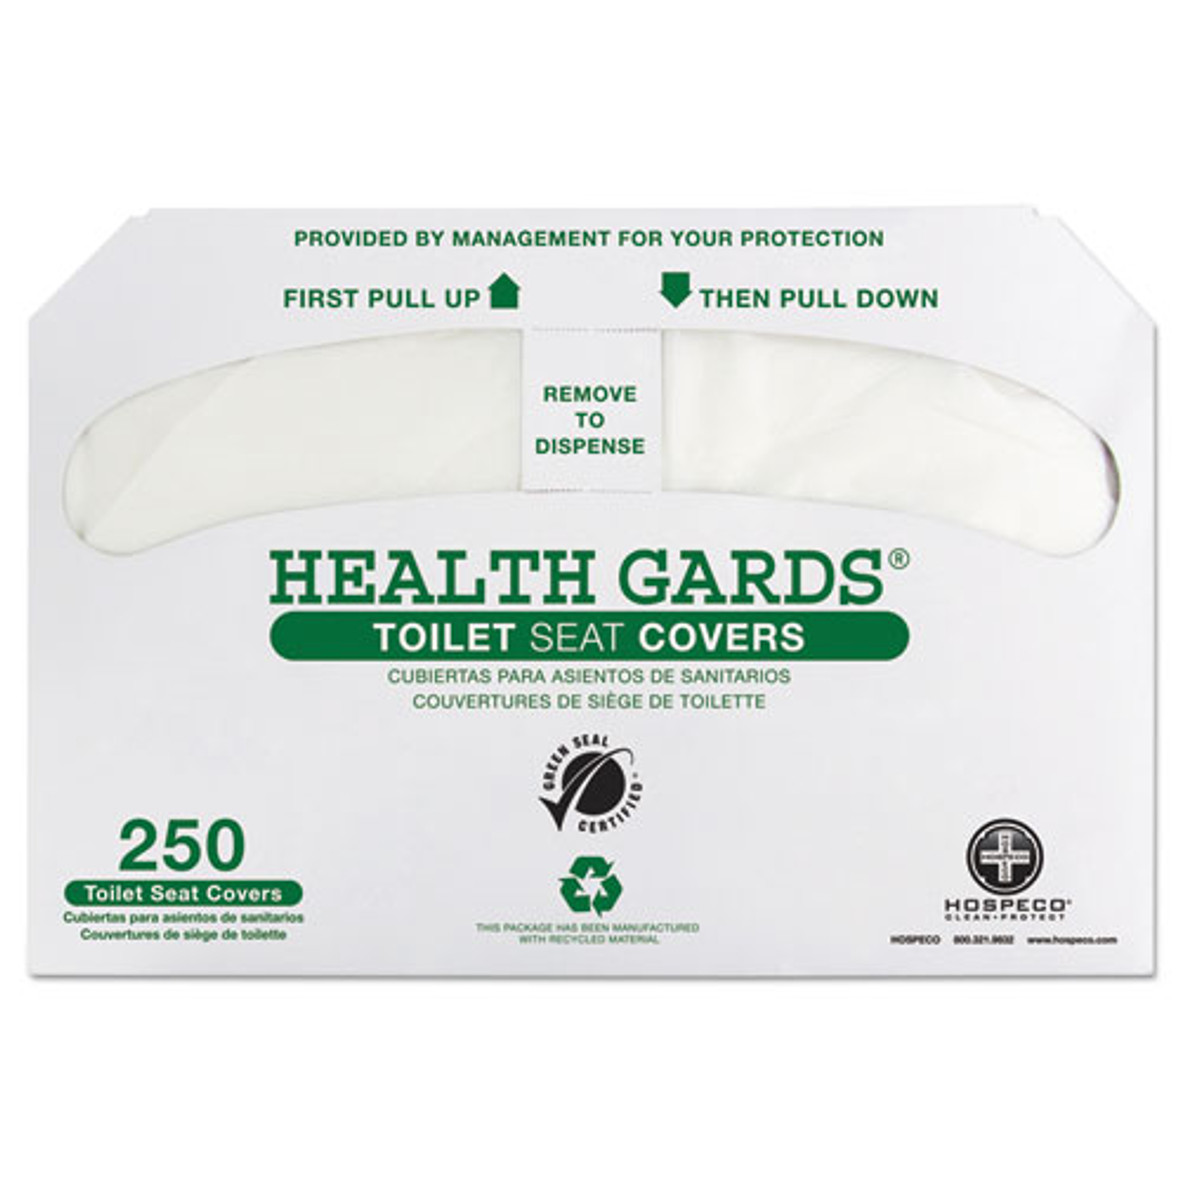 Health Gards Green Seal Recycled Toilet Seat Covers, 14.75 X 16.5, White, 250/pack, 4 Packs/carton